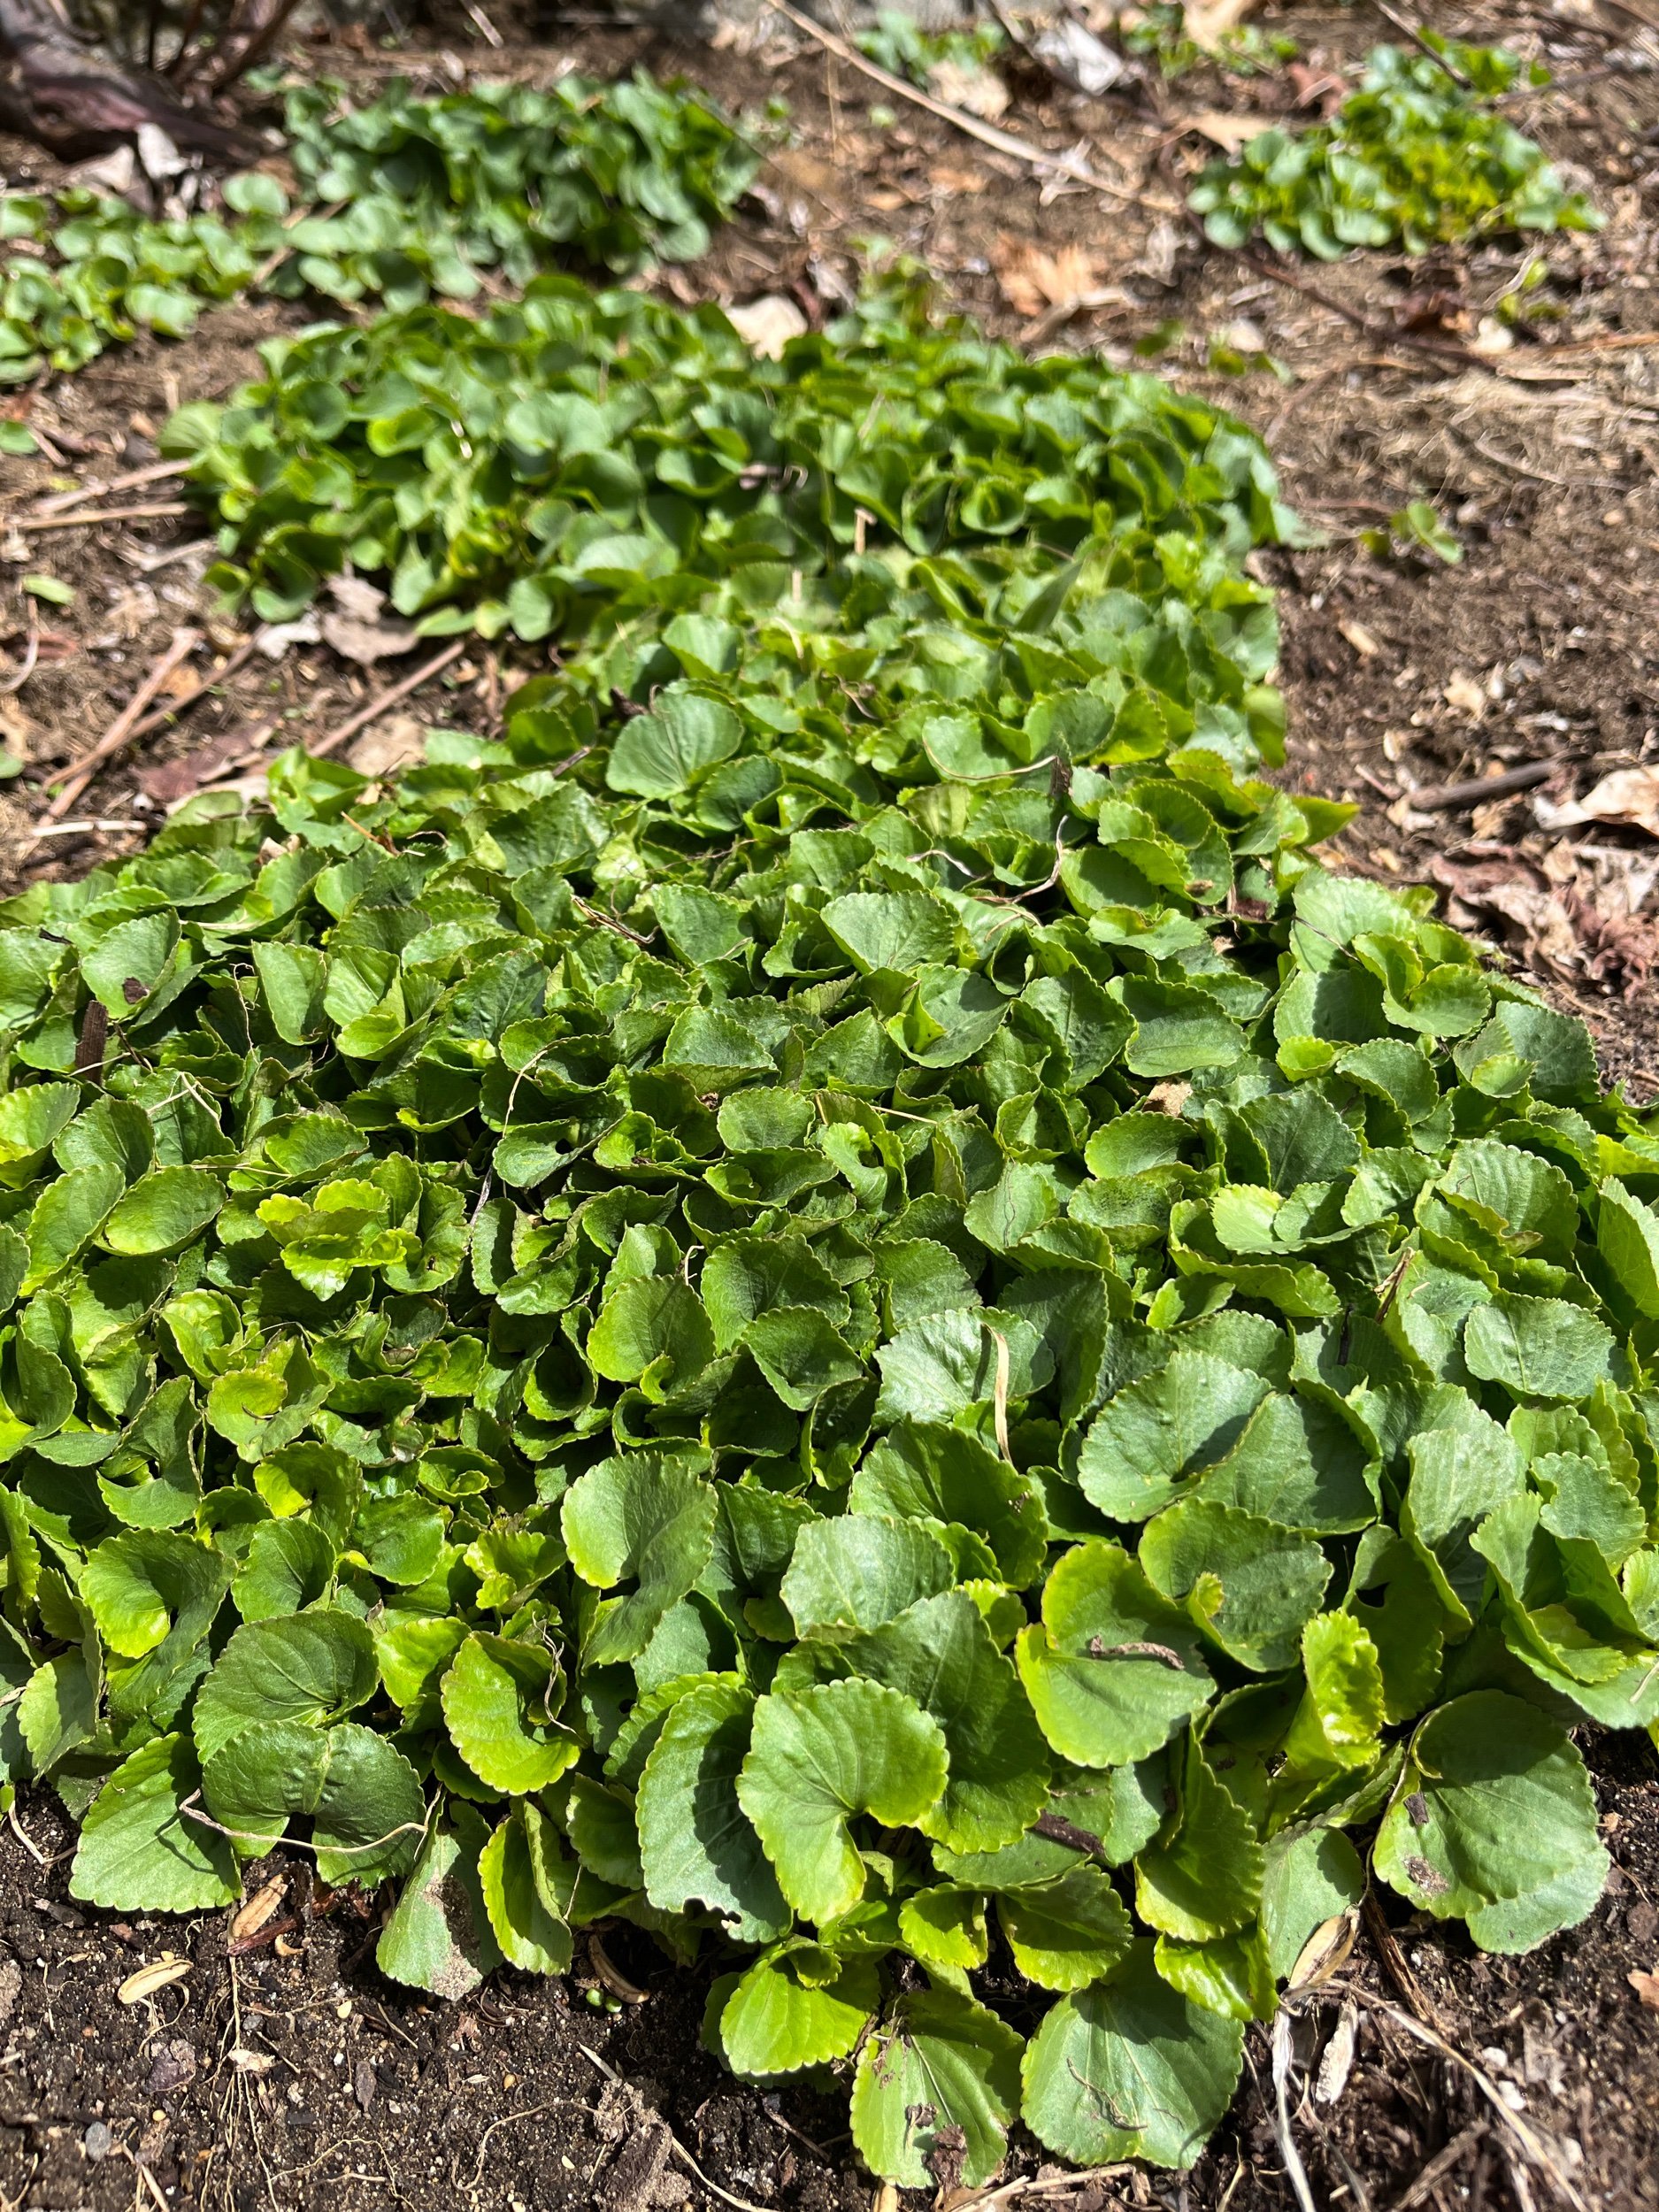  I have been cultivating the violets for a few years now, and they are just loving the space and care they are receiving. They are quickly colonizing the beds that I have set aside for them. 